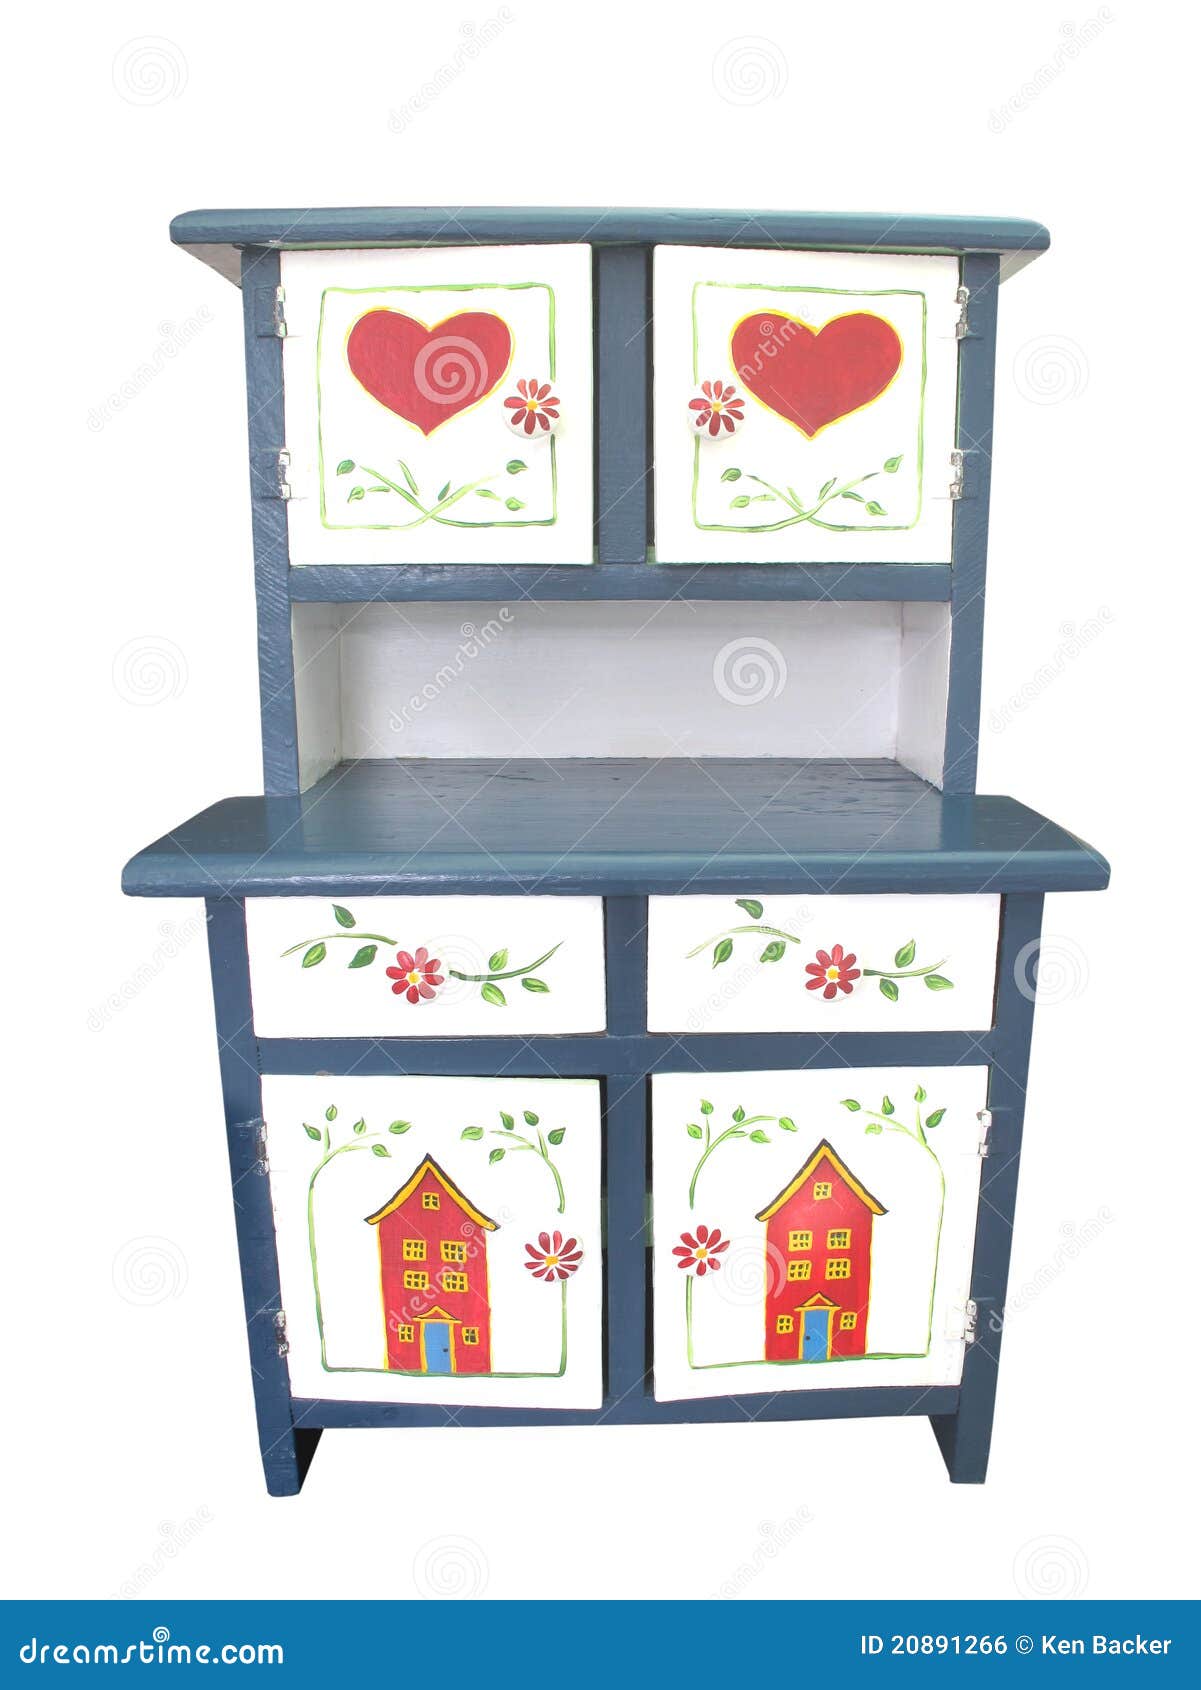 Toy 20891266 Royalty Stock  Free Image Cupboard cupboard  toy  vintage Image: Old